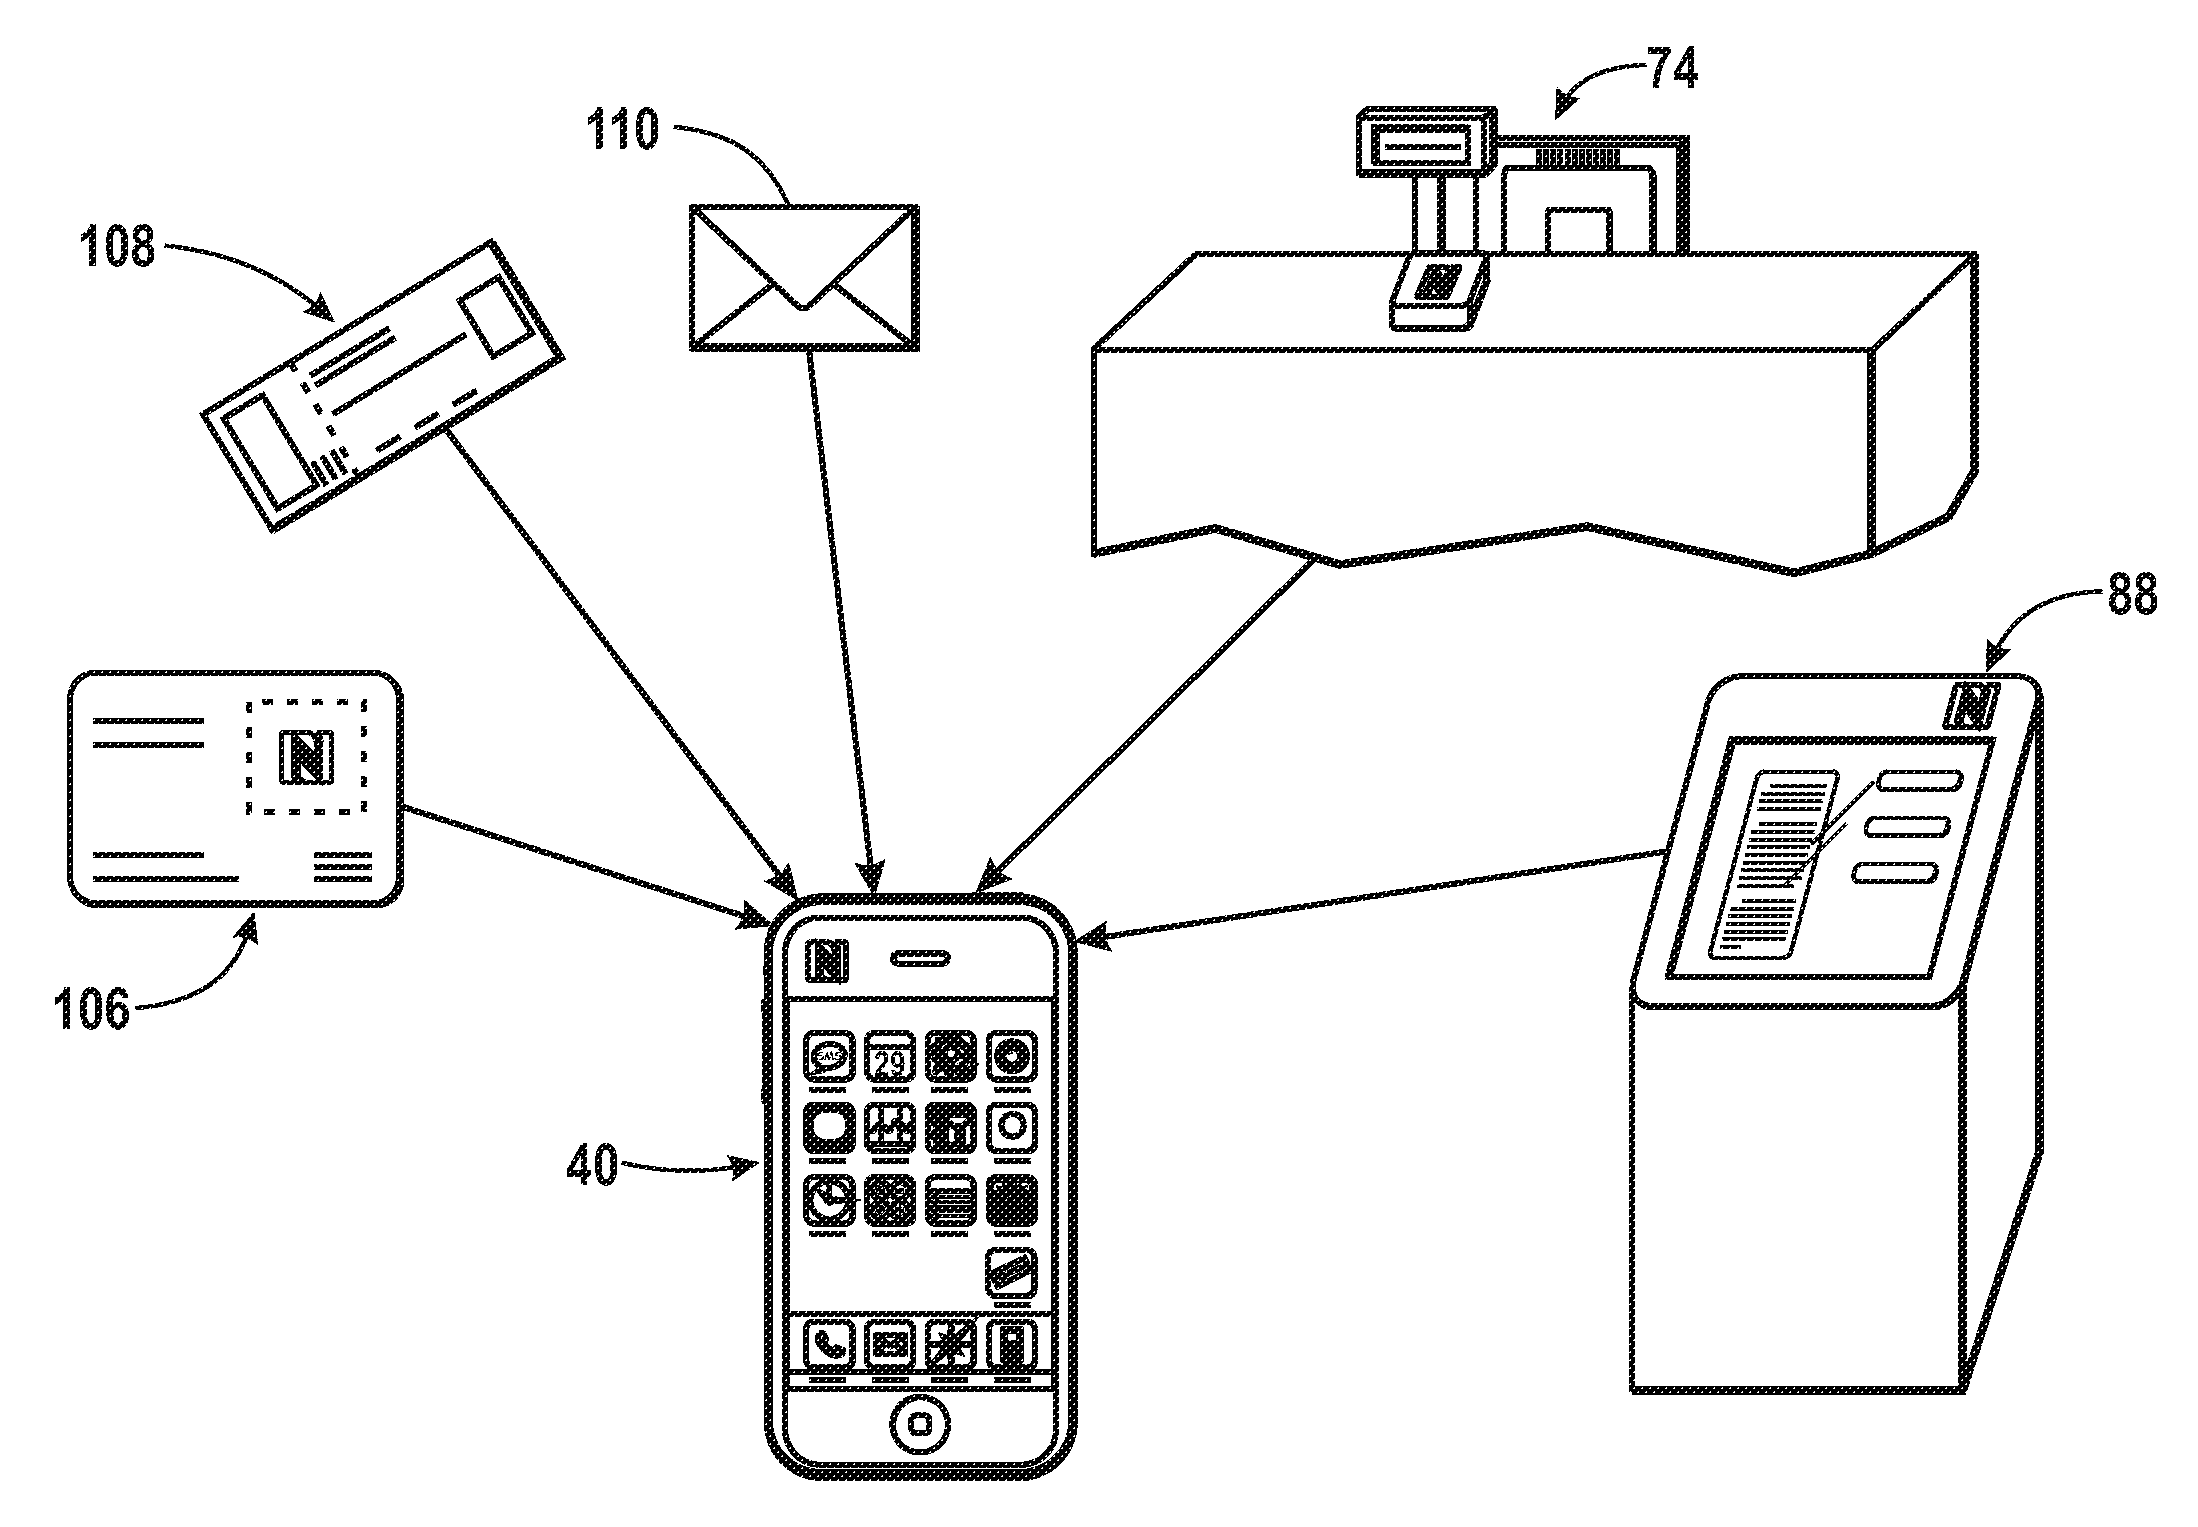 System and method for providing event-related incentives